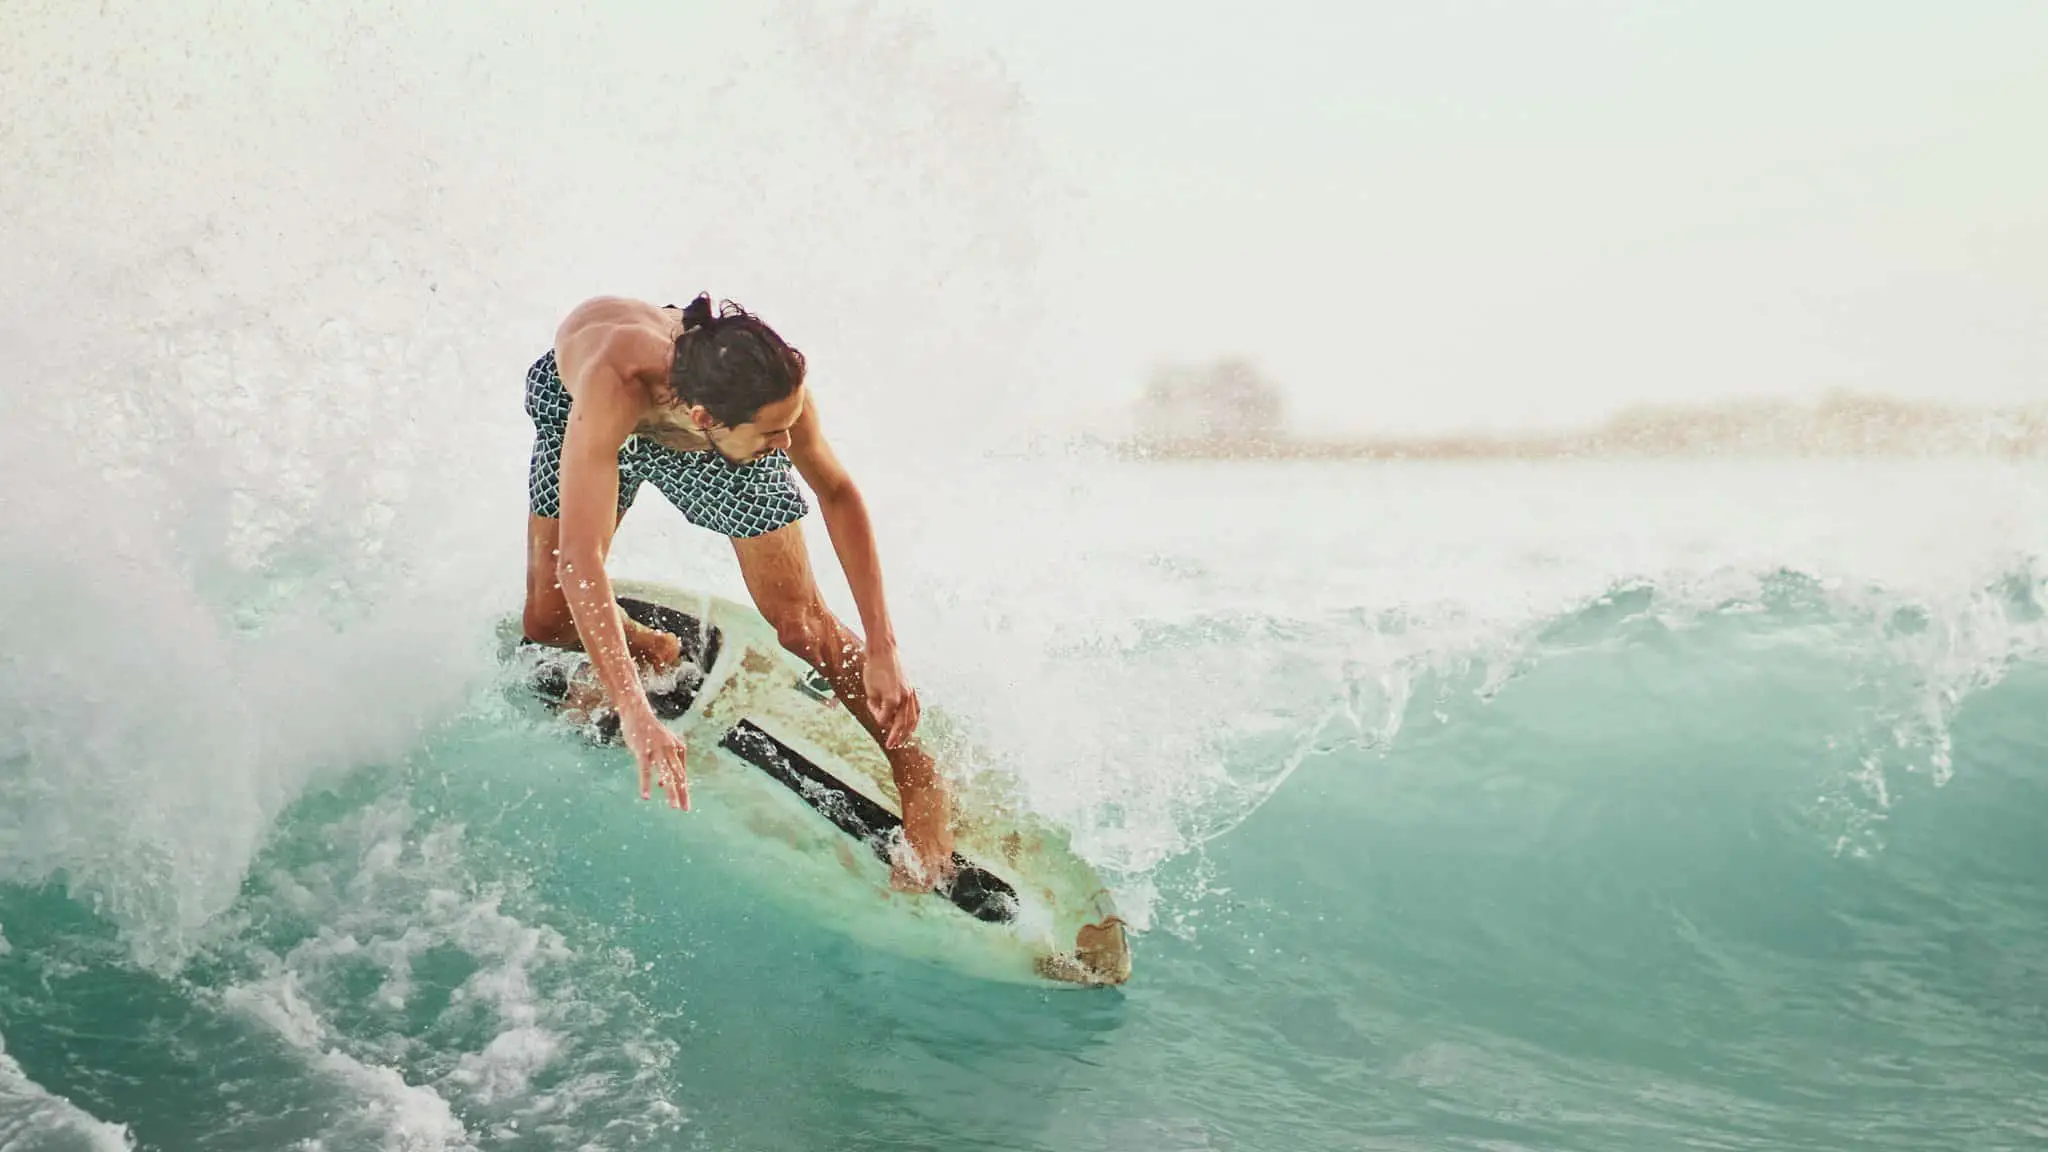 Do You Need Grip on a Skimboard? The Surprising Truth Revealed!